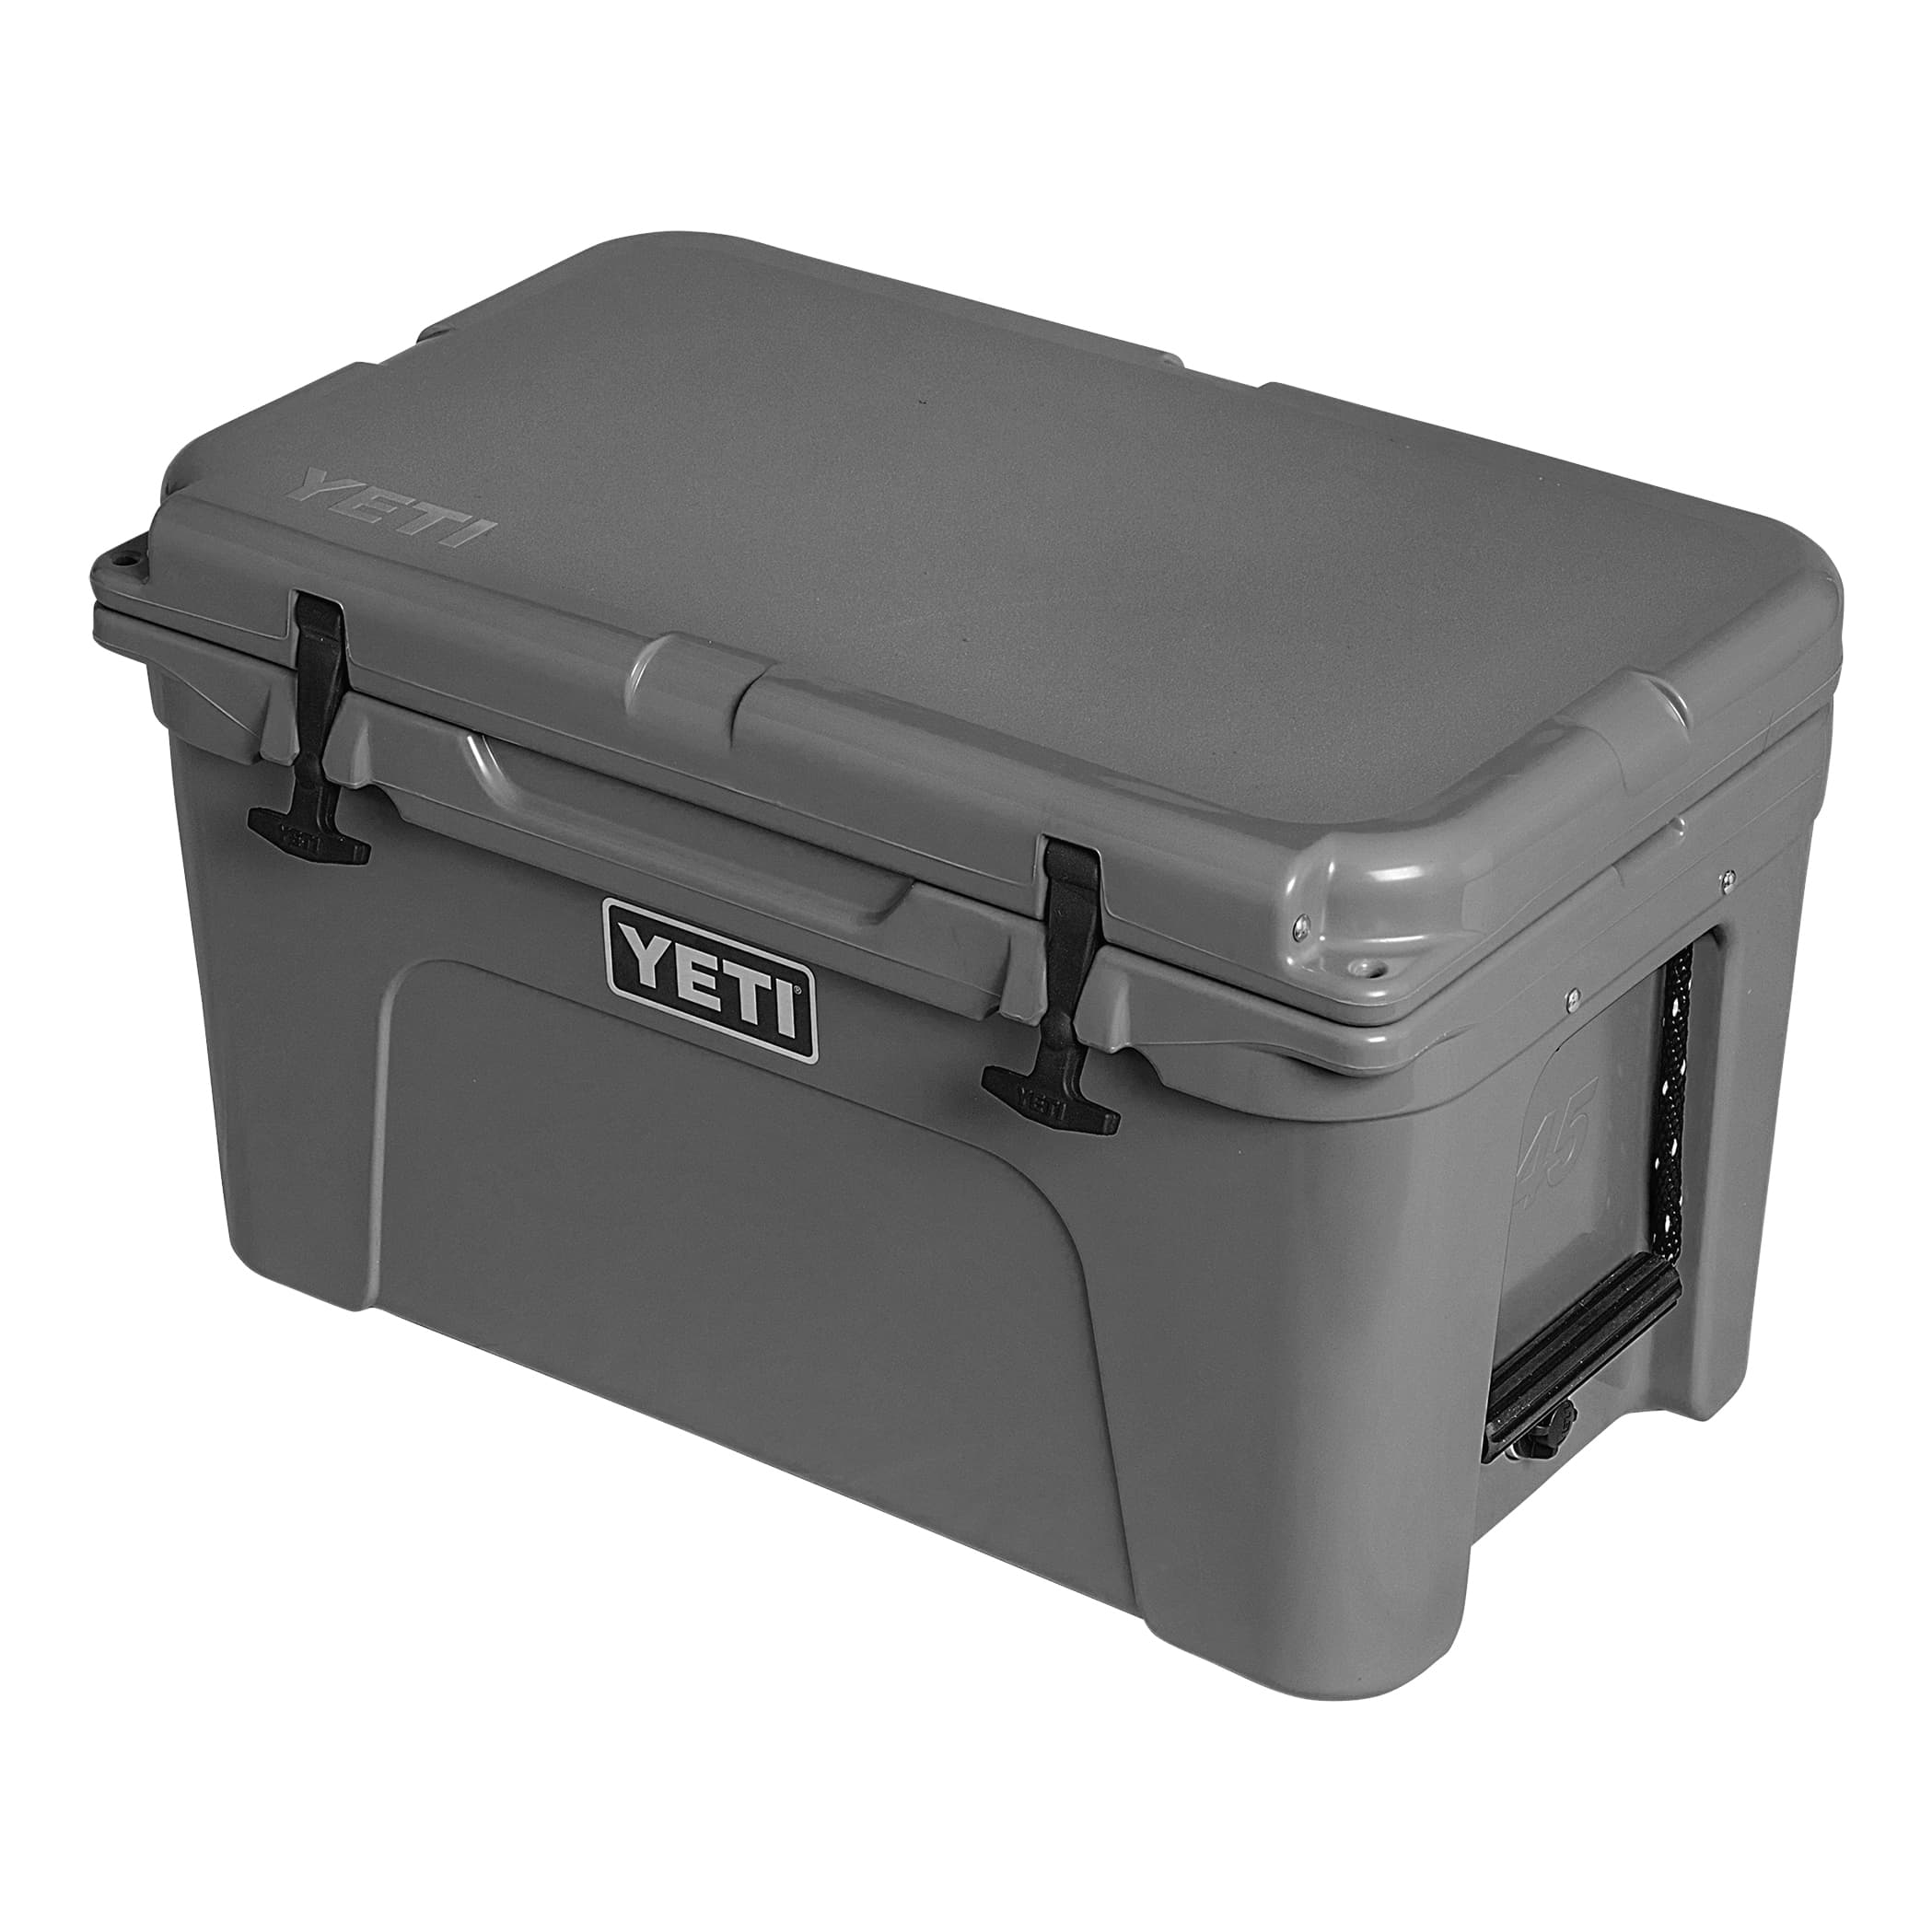 Yeti Coolers Tundra 45 Series Cooler - Charcoal - Alternate View